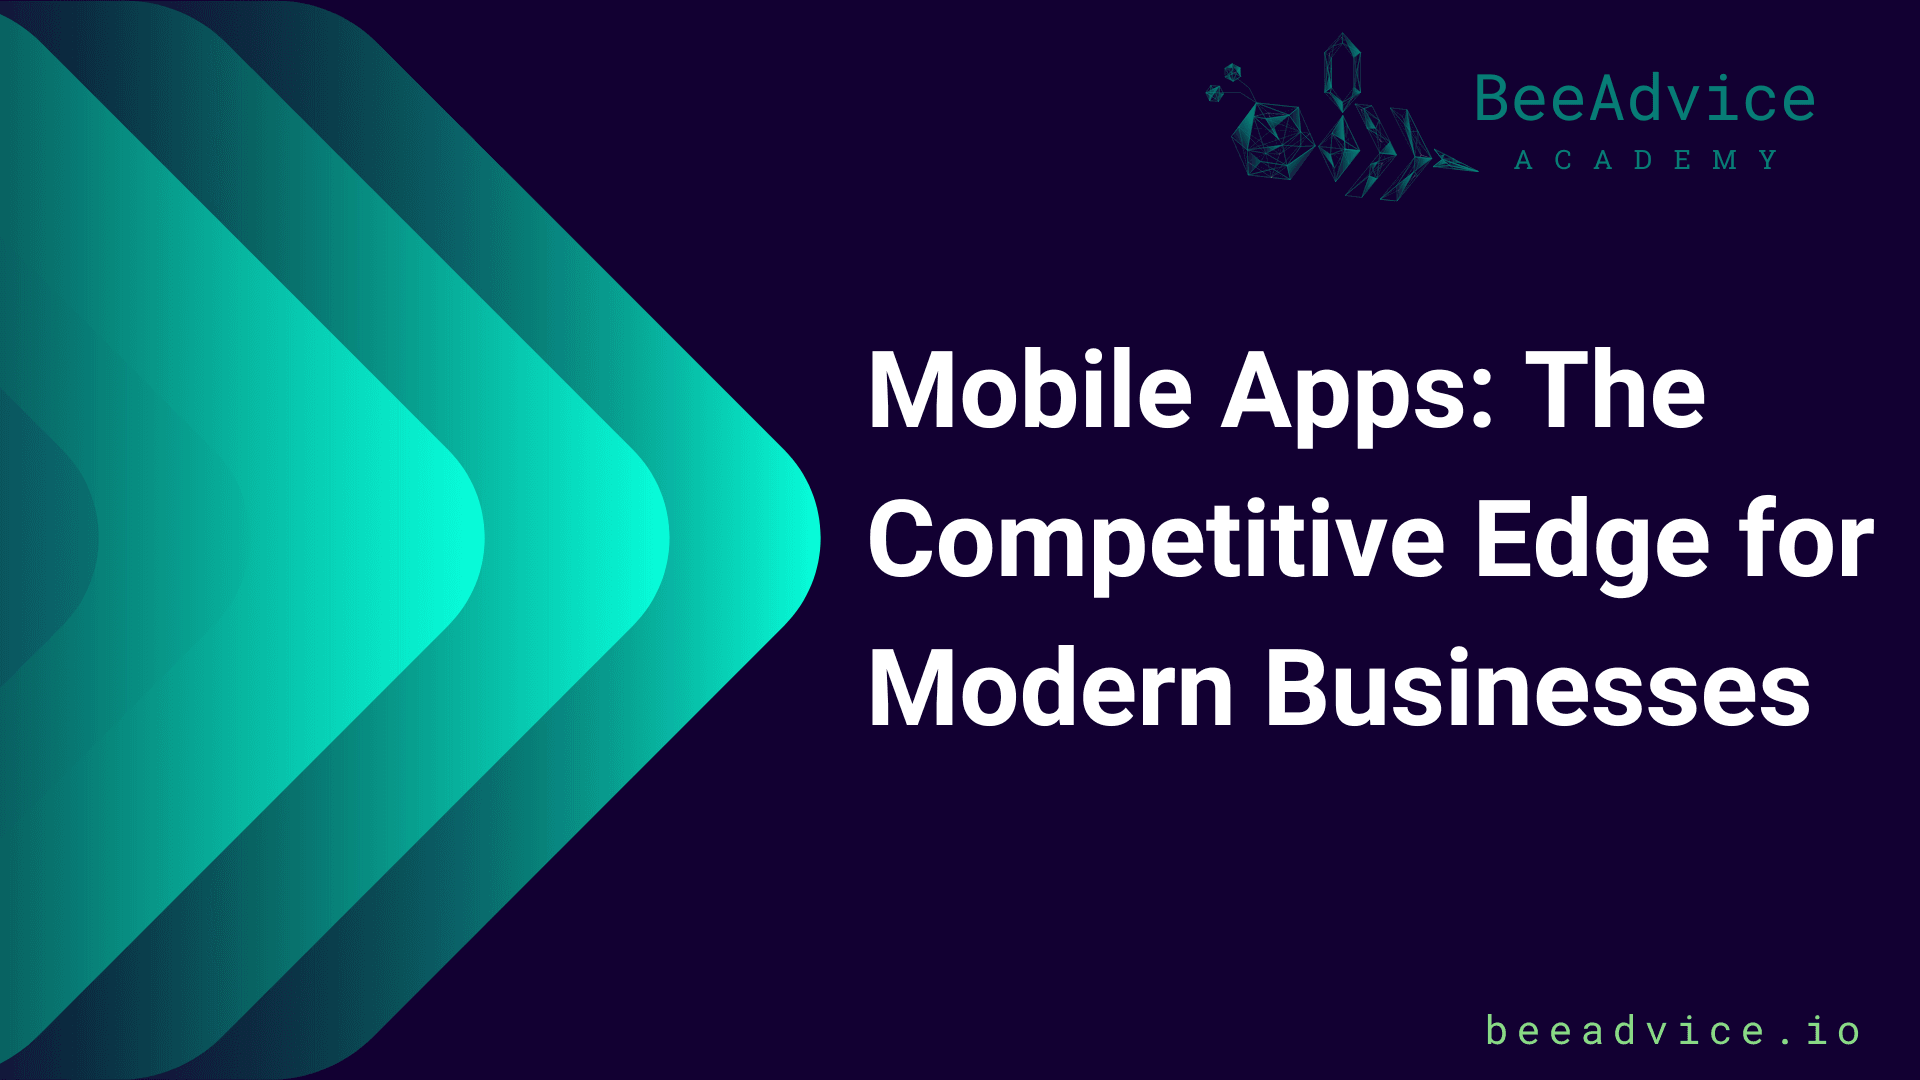 Mobile Apps: The Competitive Edge for Modern Businesses | BeeAdvice